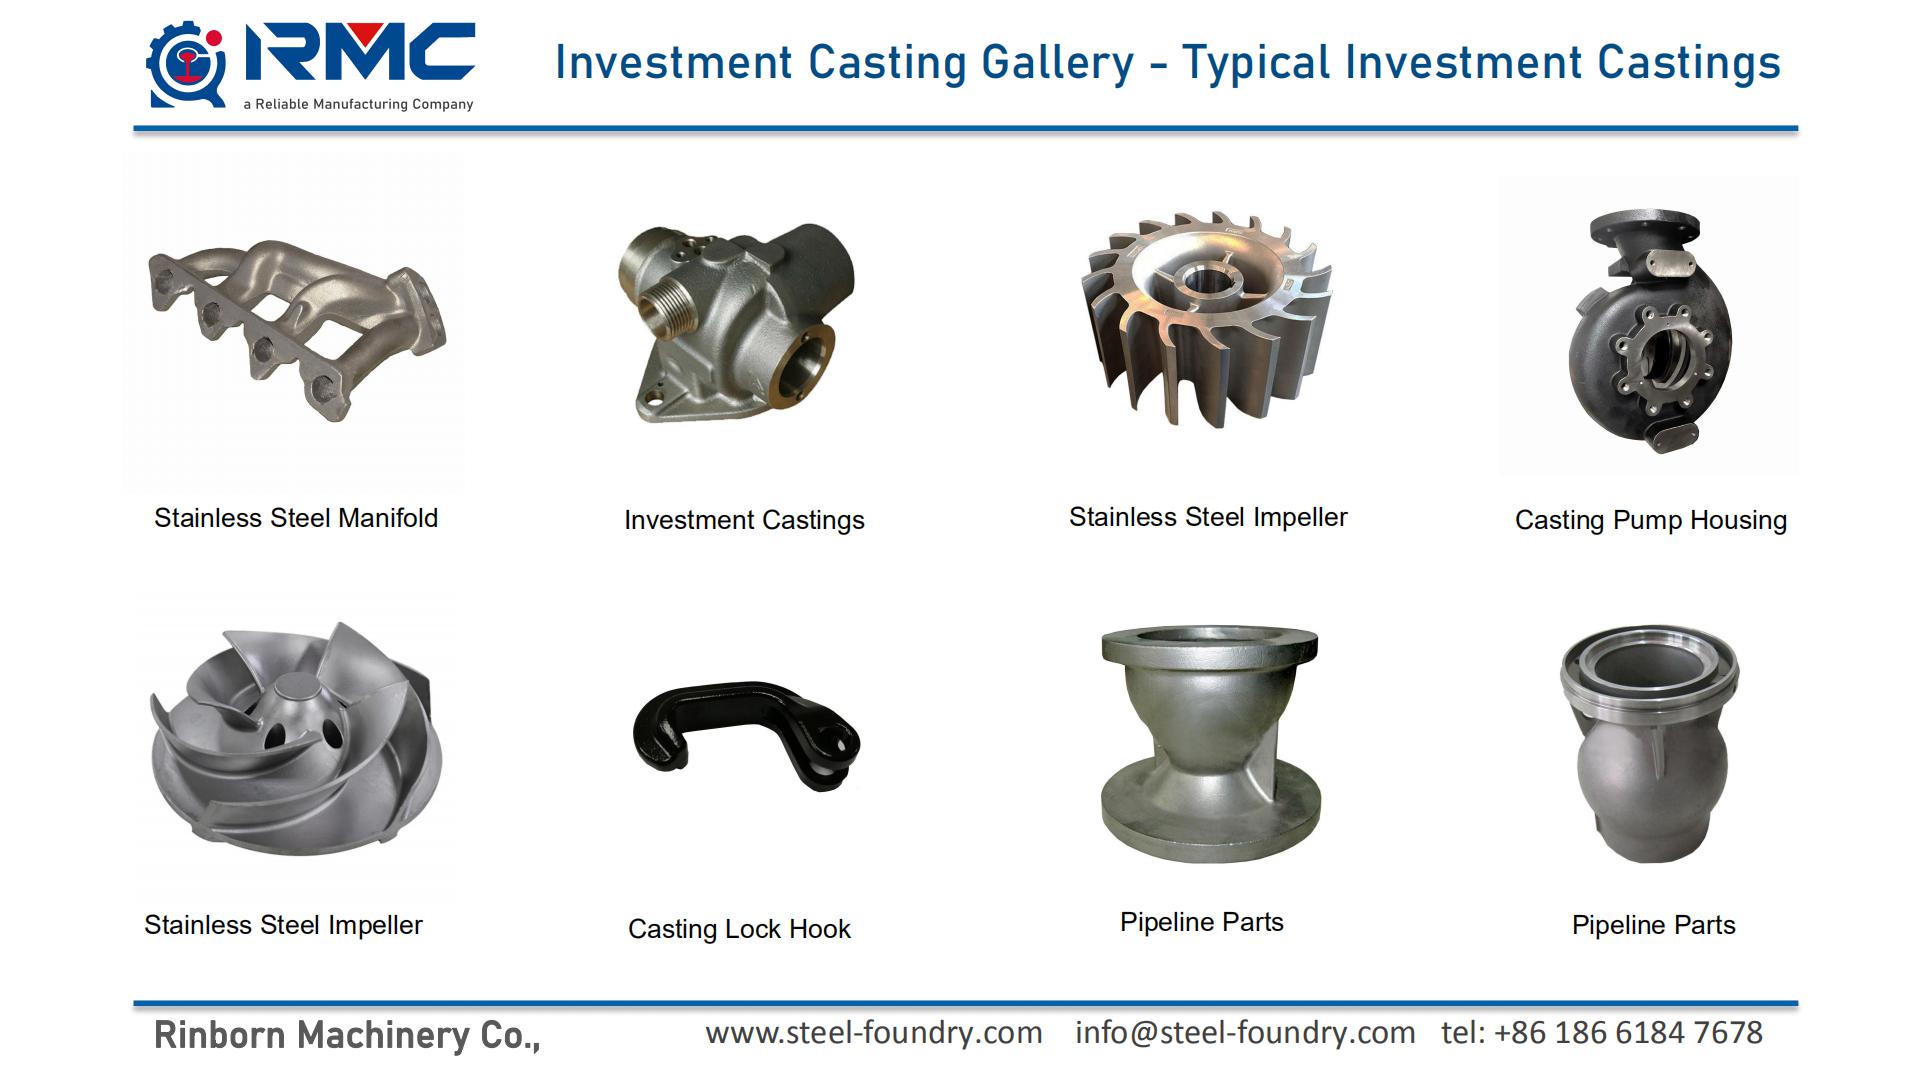 stainless steel castings by investment casting